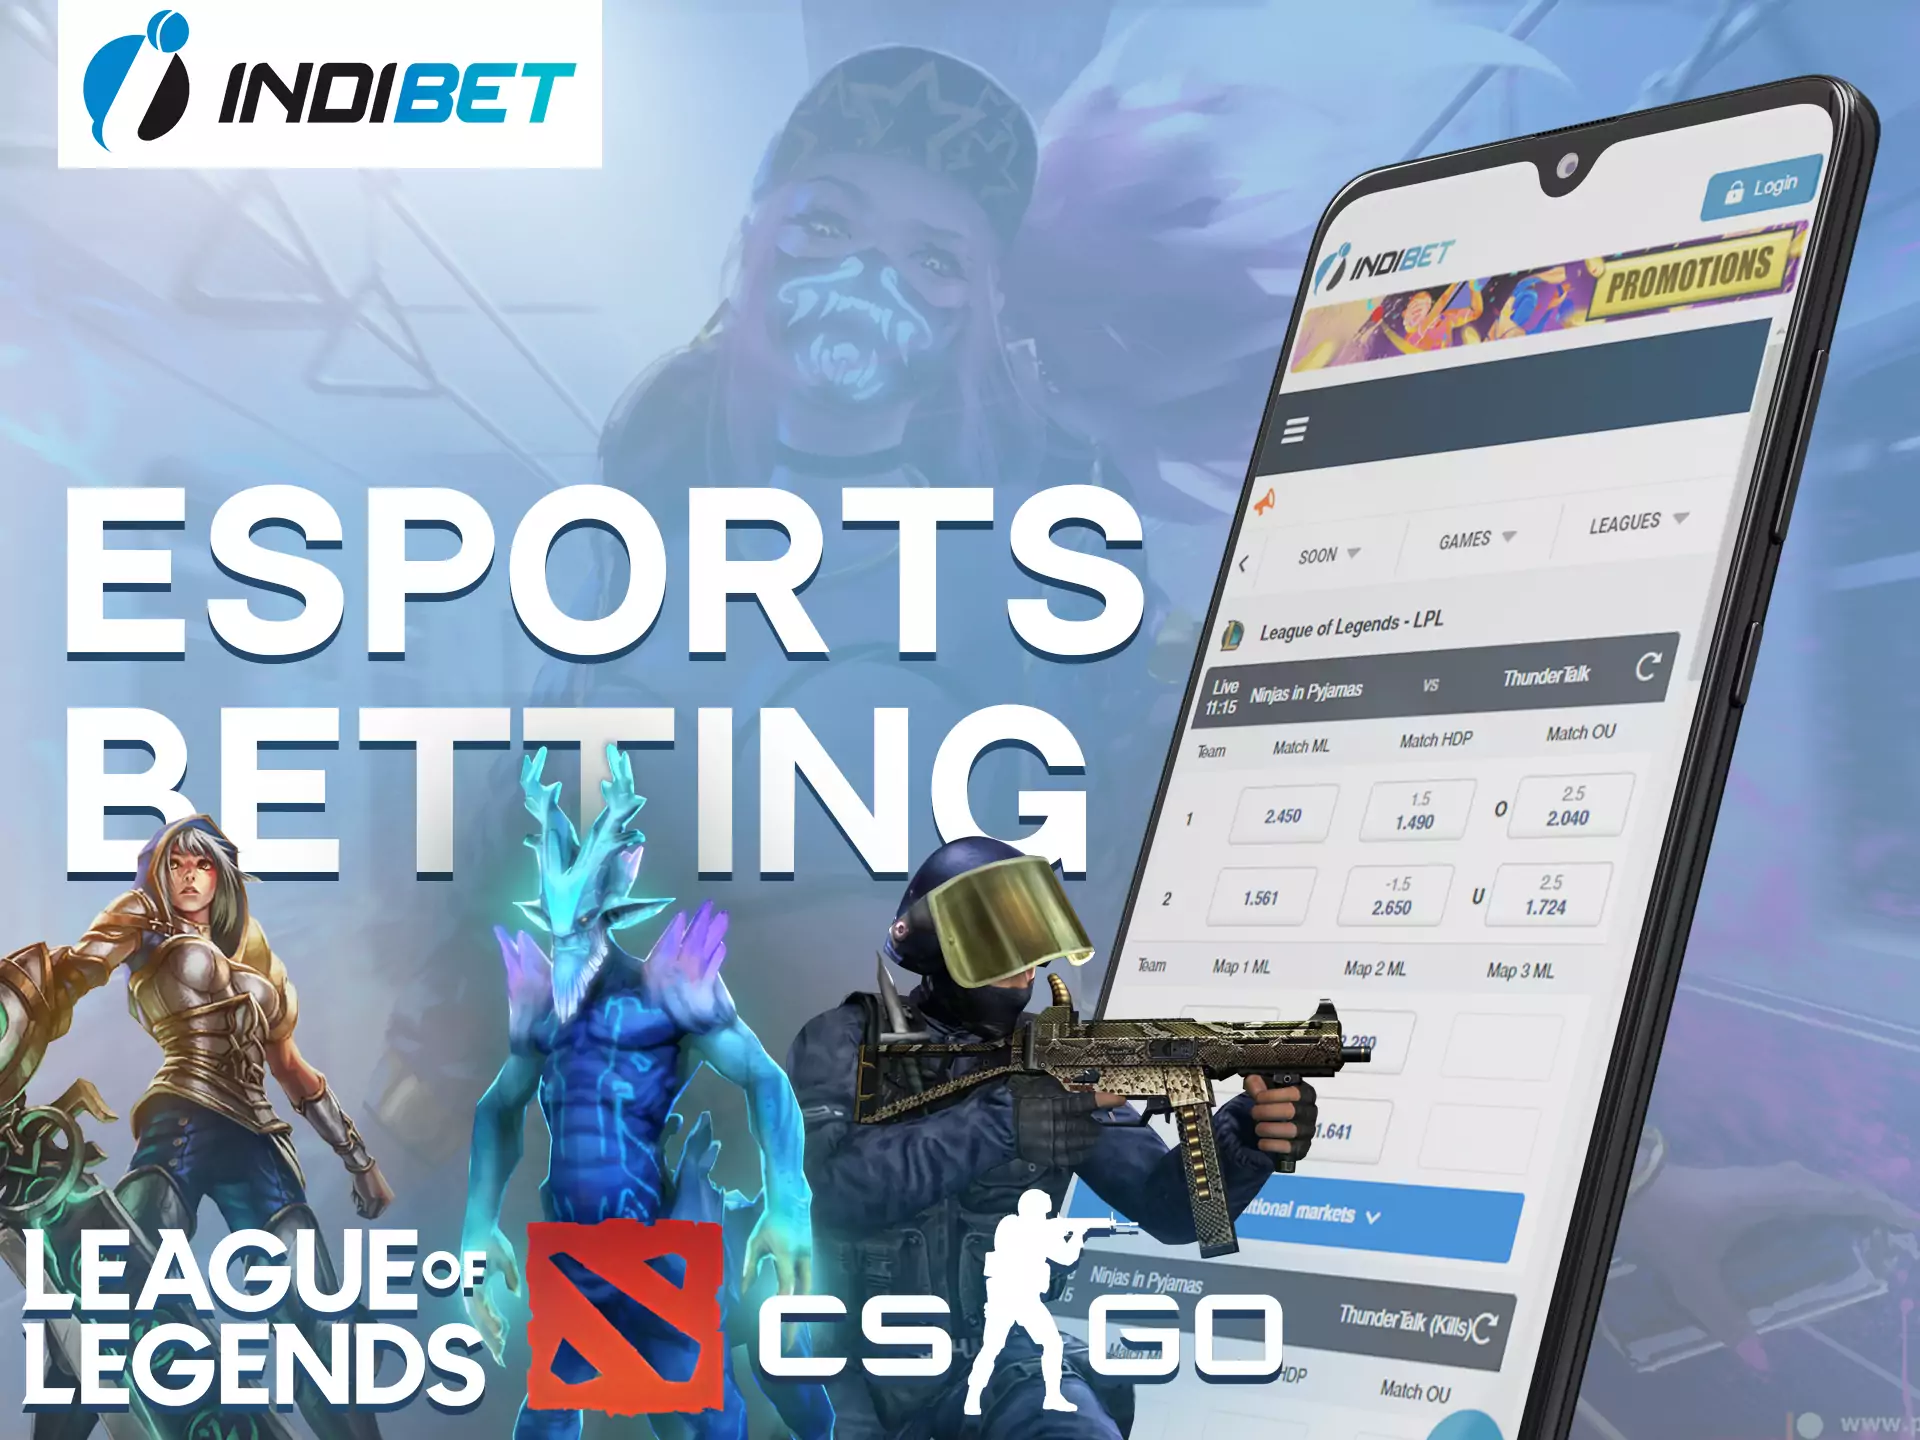 Bet on your favourite esports team at Indibet.